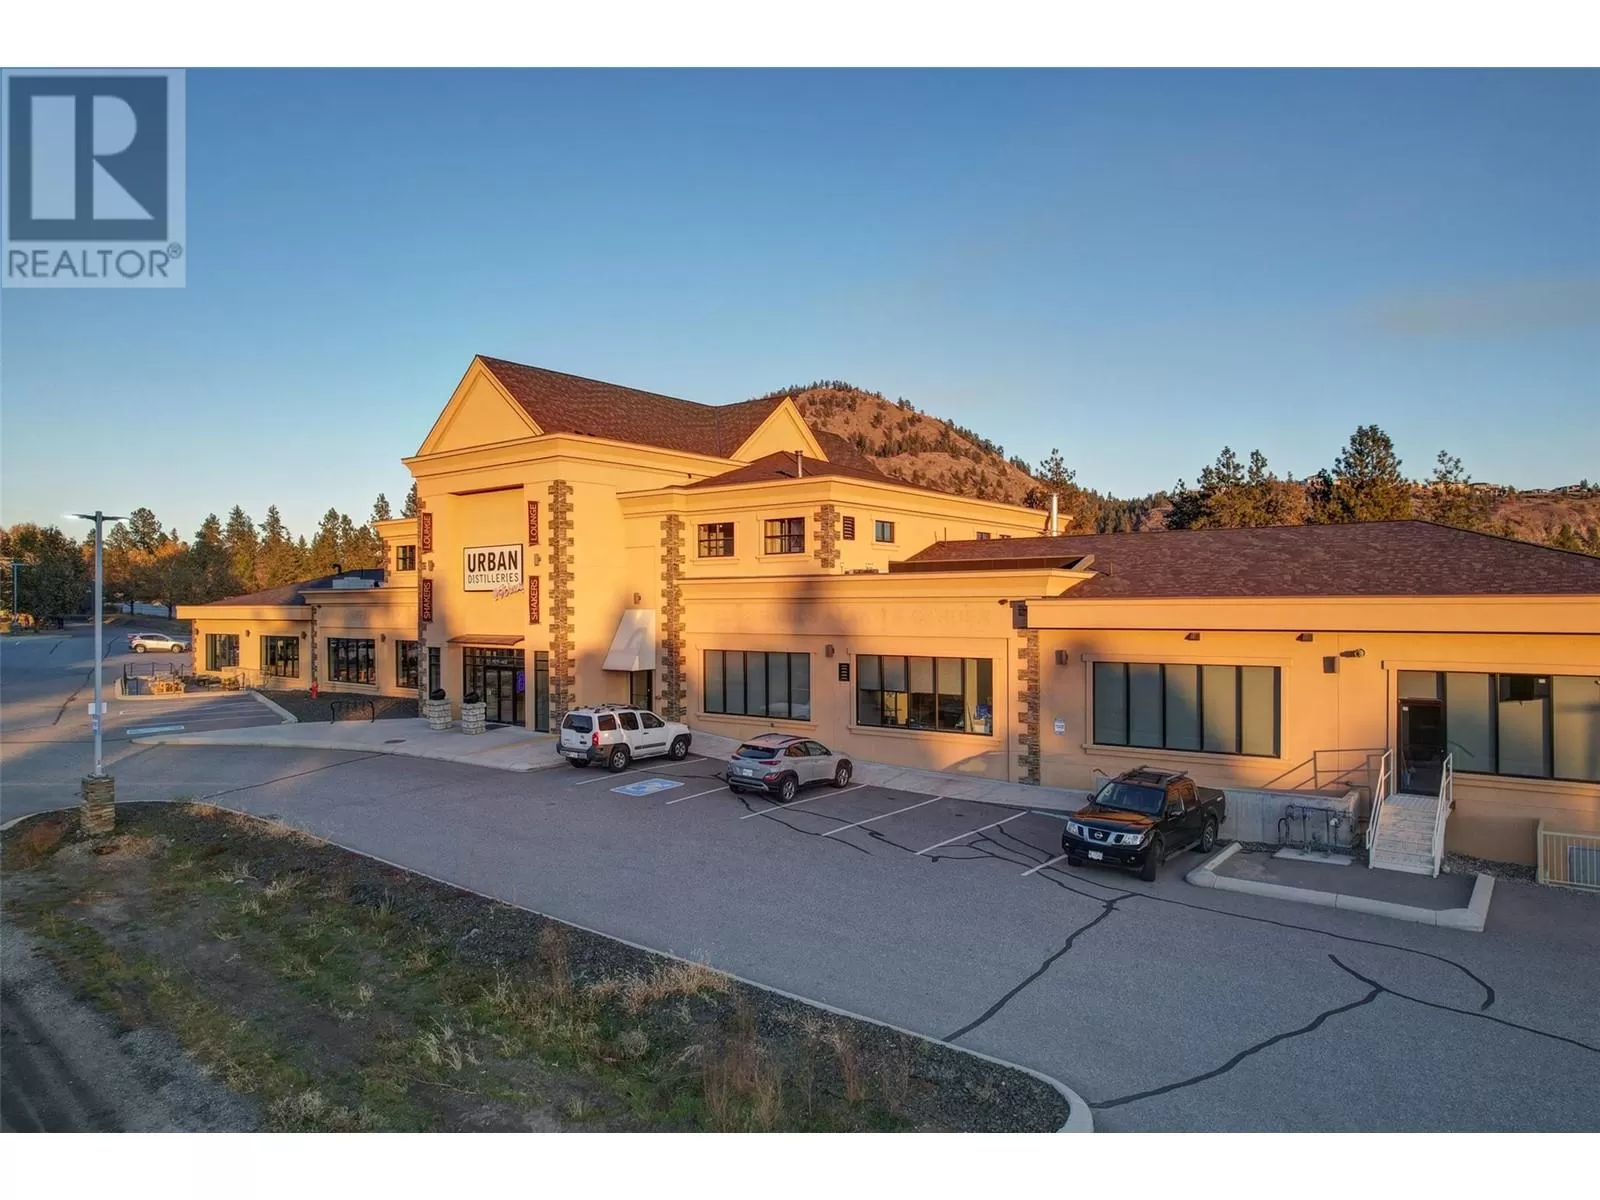 Retail for rent: 1979 Old Okanagan Highway Unit# 401a/401b/402/403, Westbank, British Columbia V4T 3A4